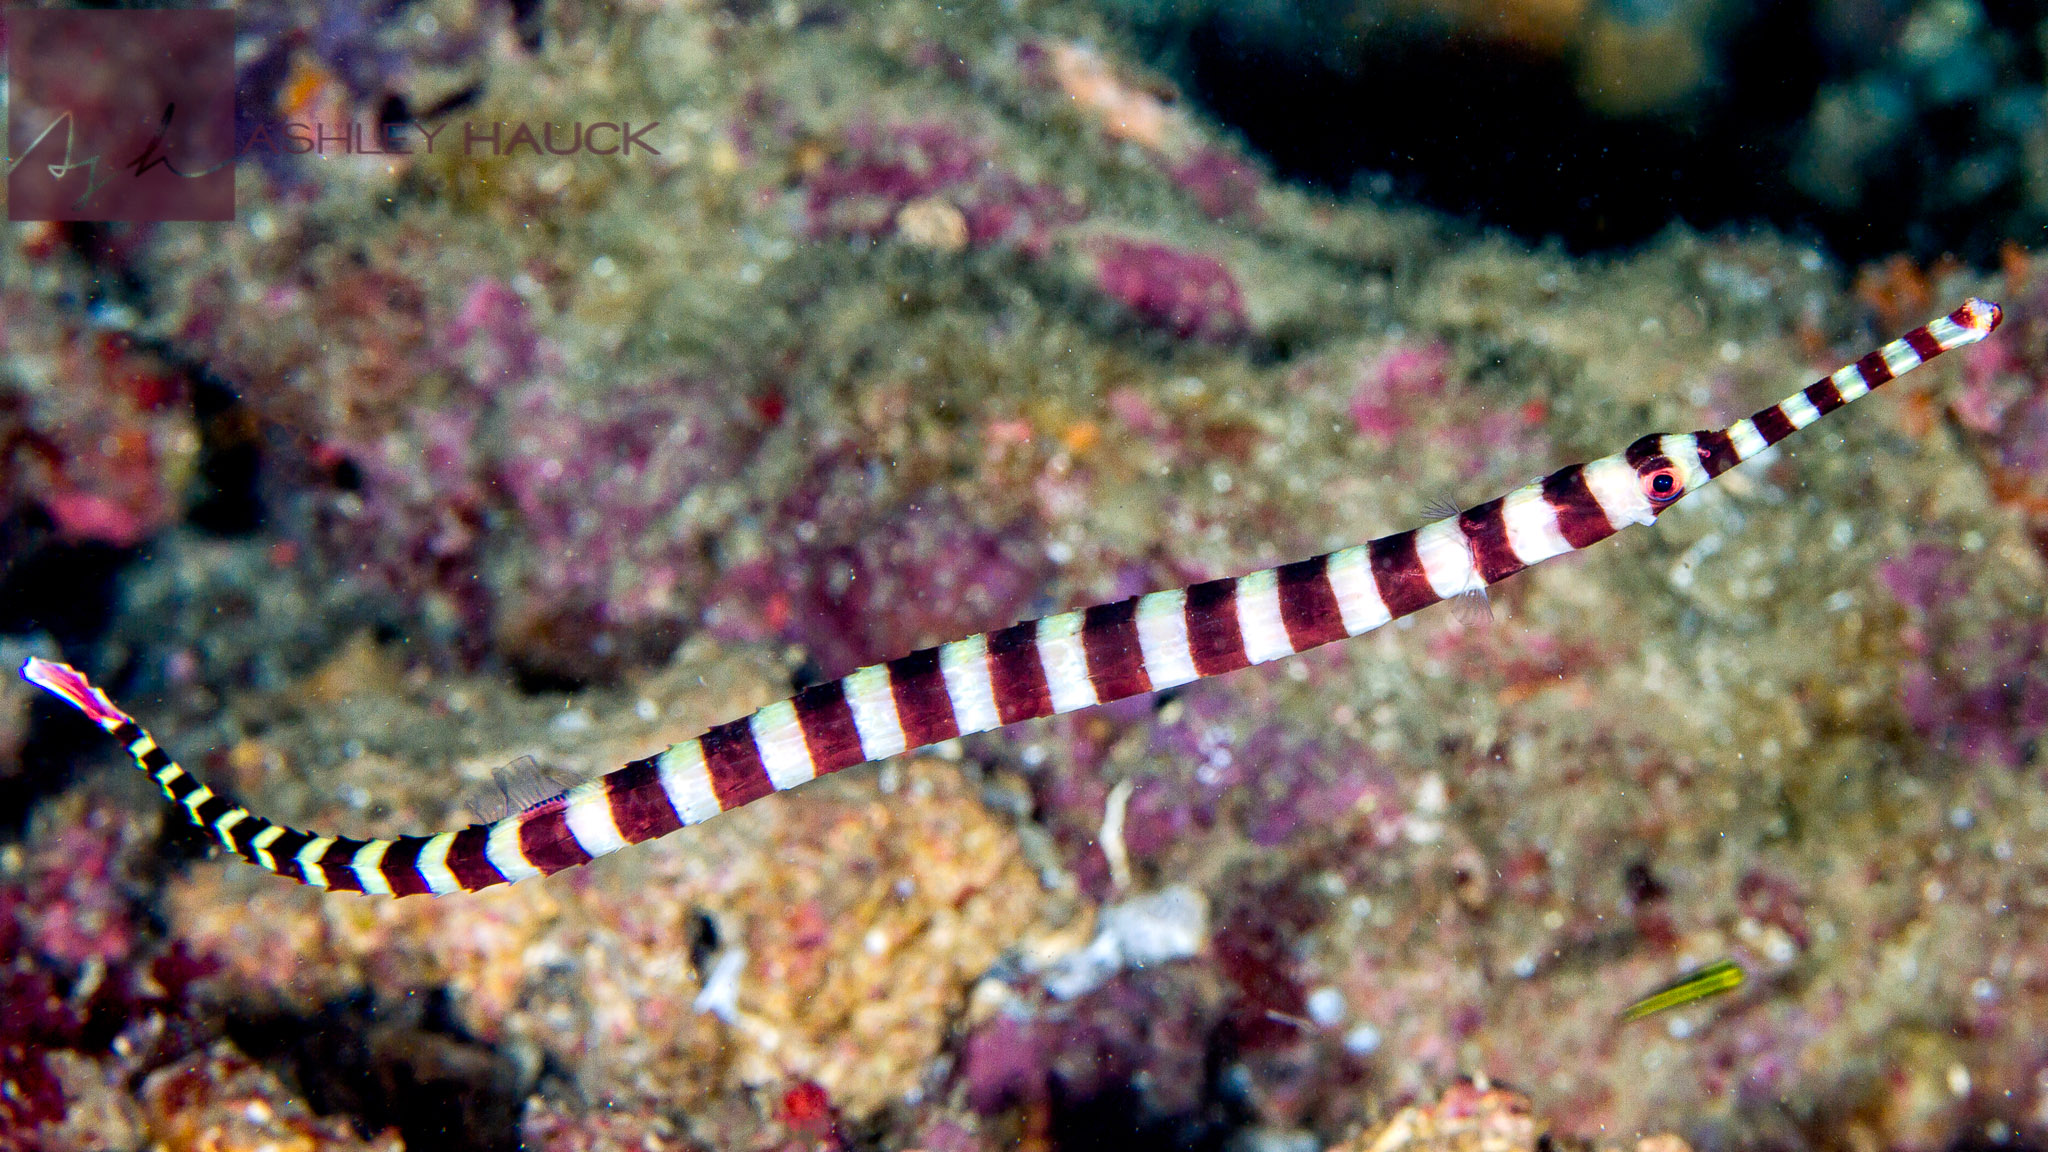 Ringed or Banded Pipefish (Dunckerocampus dactyliophorus), another member of the Syngnathidae family